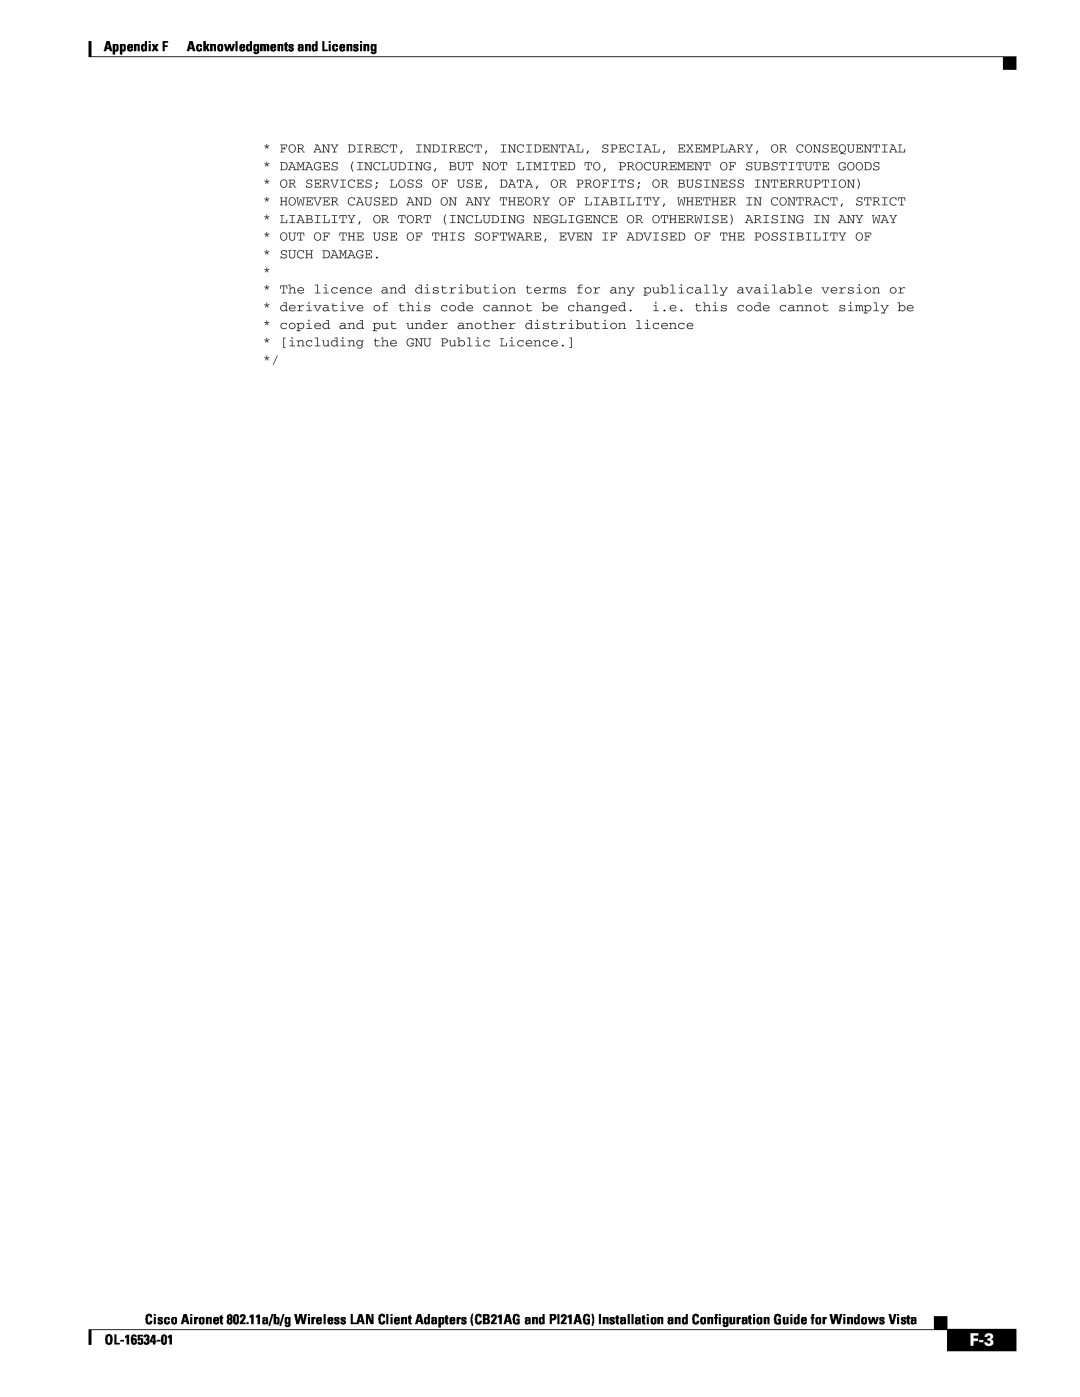 Cisco Systems CB21AG, PI21AG manual Appendix F Acknowledgments and Licensing, OL-16534-01 